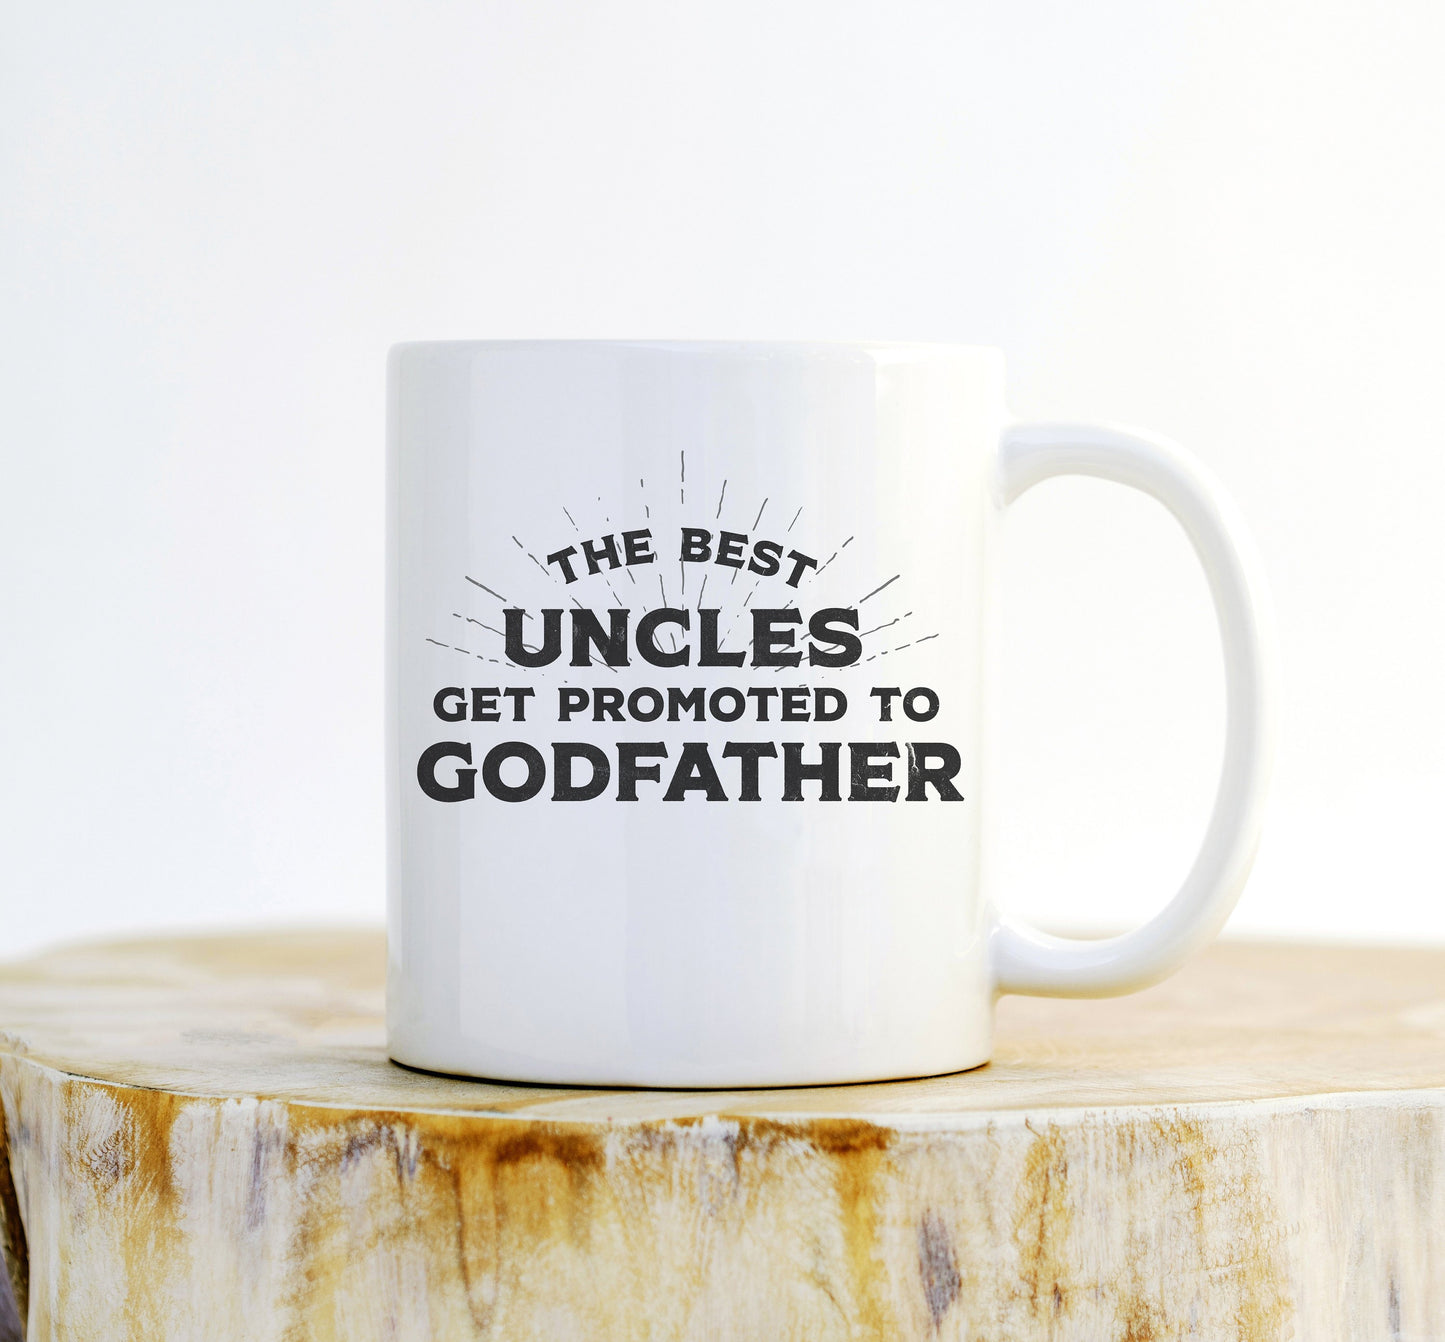 The Best Uncles Get Promoted to Godfather Mug